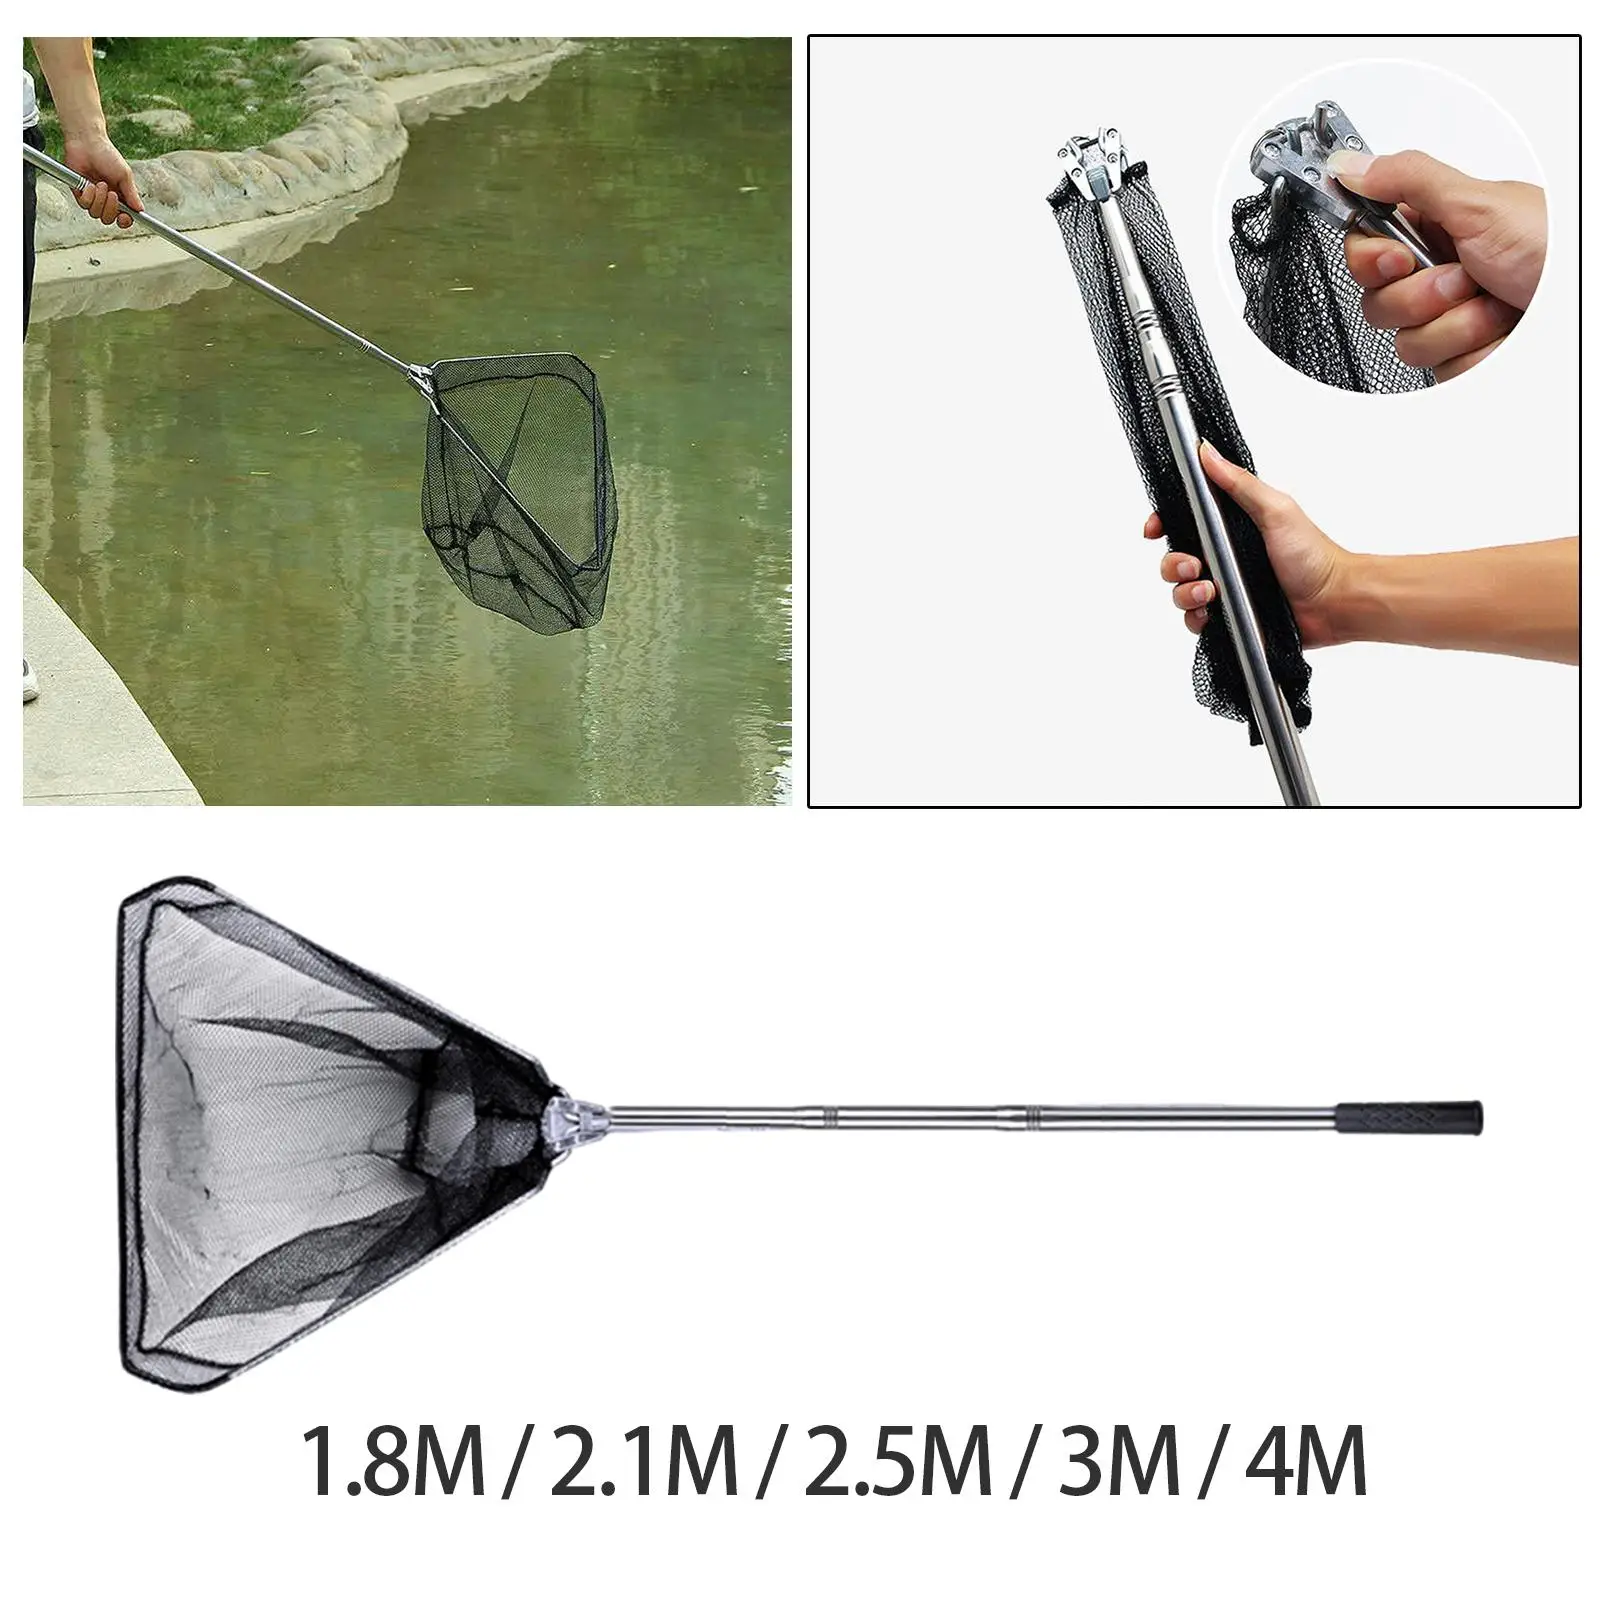 Floating Fish Net Foldable Pole Fine Workmanship Multifunctional Collapsing Handle Retractable Accessory for Fishing Enthusiasts